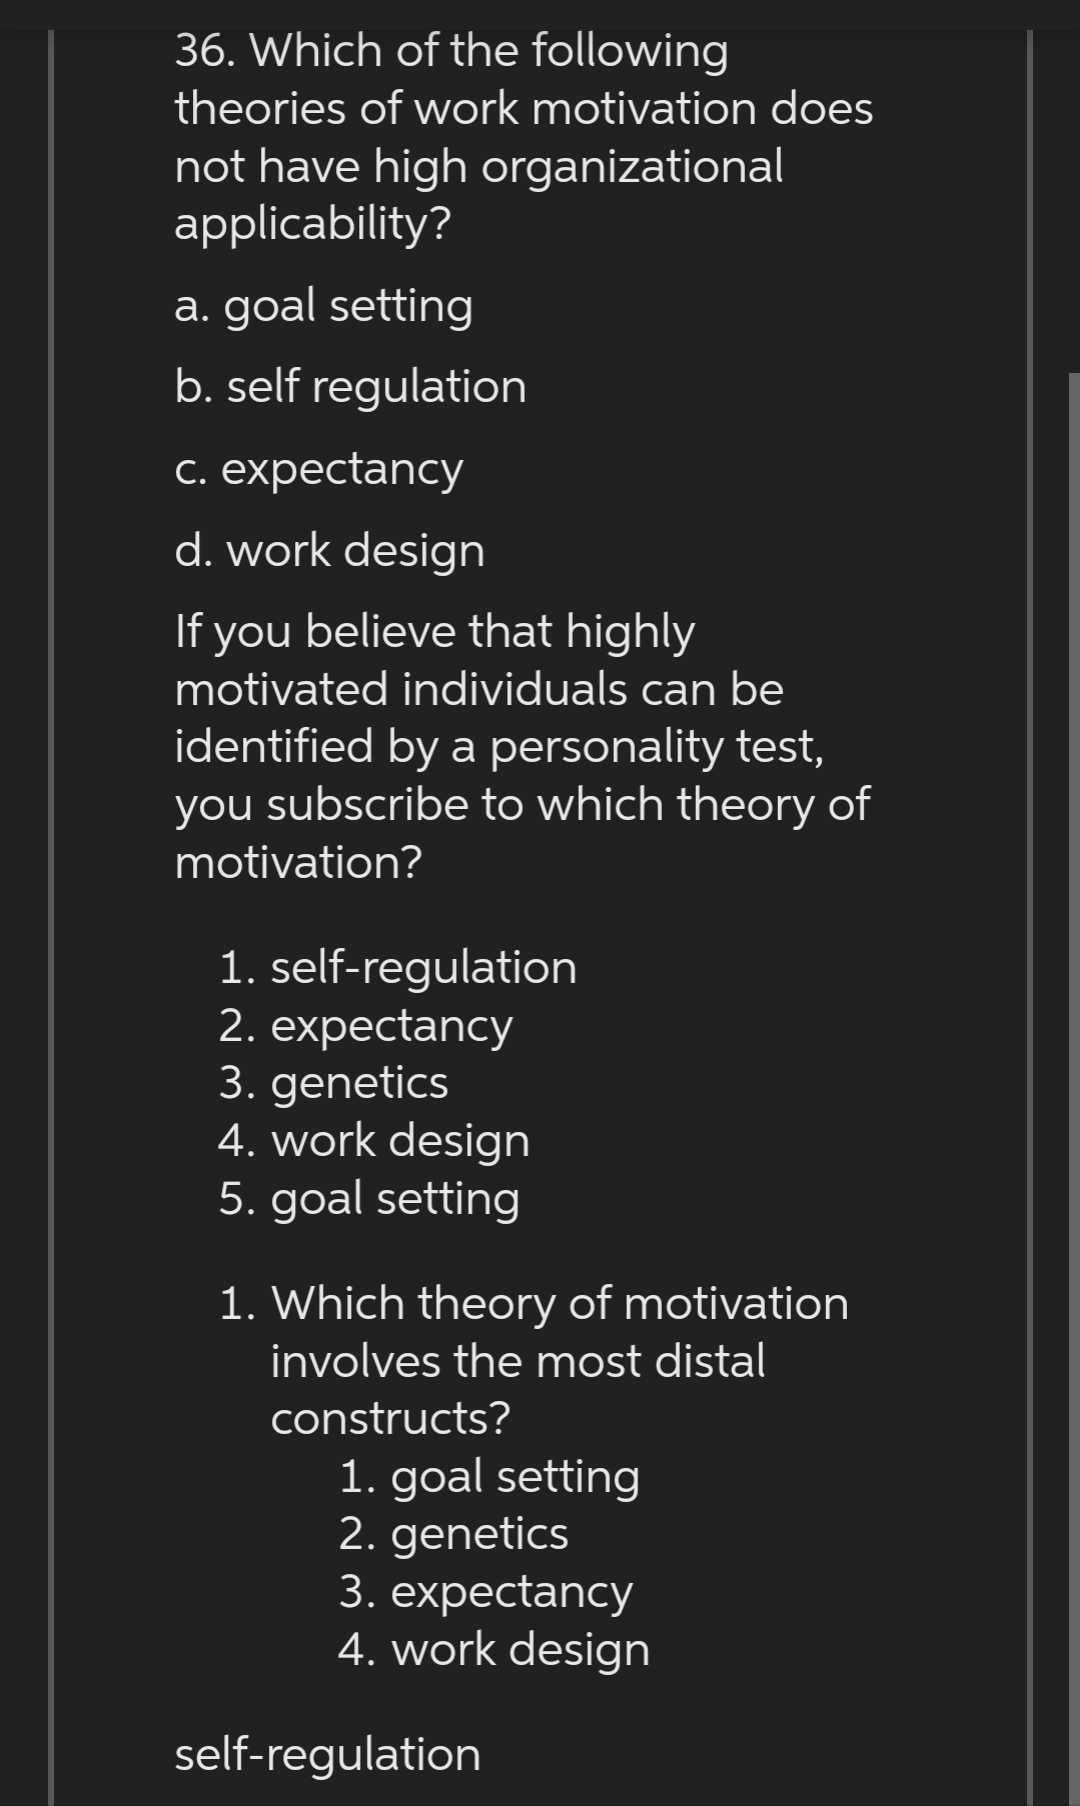 36. Which of the following
theories of work motivation does
not have high organizational
applicability?
a. goal setting
b. self regulation
c. expectancy
d. work design
If you believe that highly
motivated individuals can be
identified by a personality test,
you subscribe to which theory of
motivation?
1. self-regulation
2. expectancy
3. genetics
4. work design
5. goal setting
1. Which theory of motivation
involves the most distal
constructs?
1. goal setting
2. genetics
3. expectancy
4. work design
self-regulation